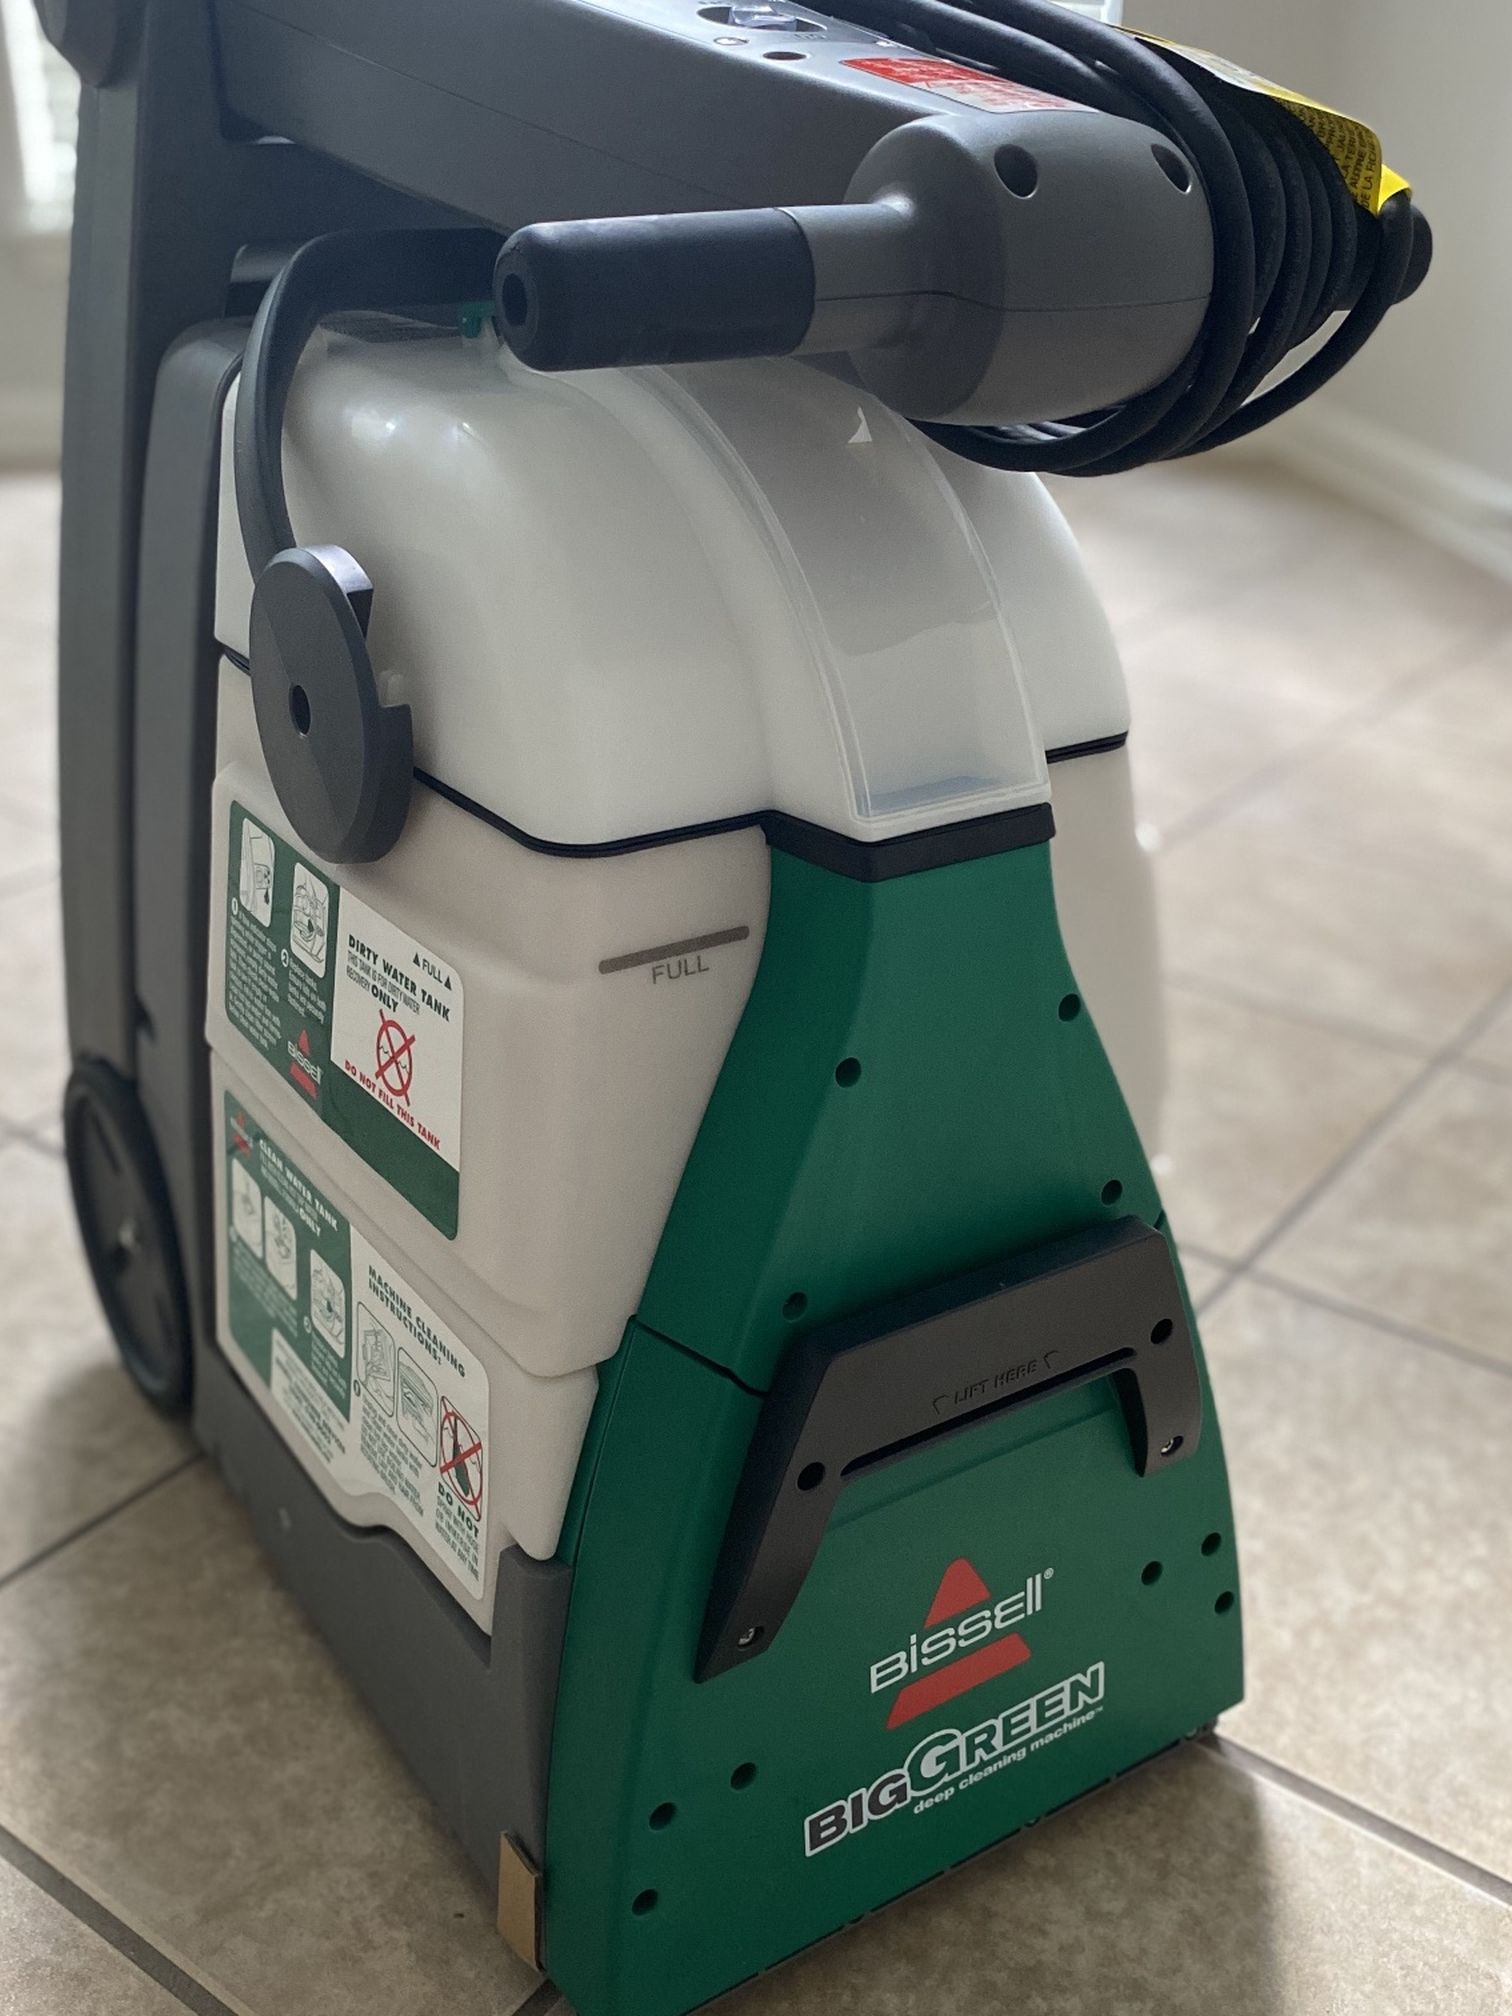 Bissell Big Green Carpet Cleaner For House, Stairs, Cars Etc.